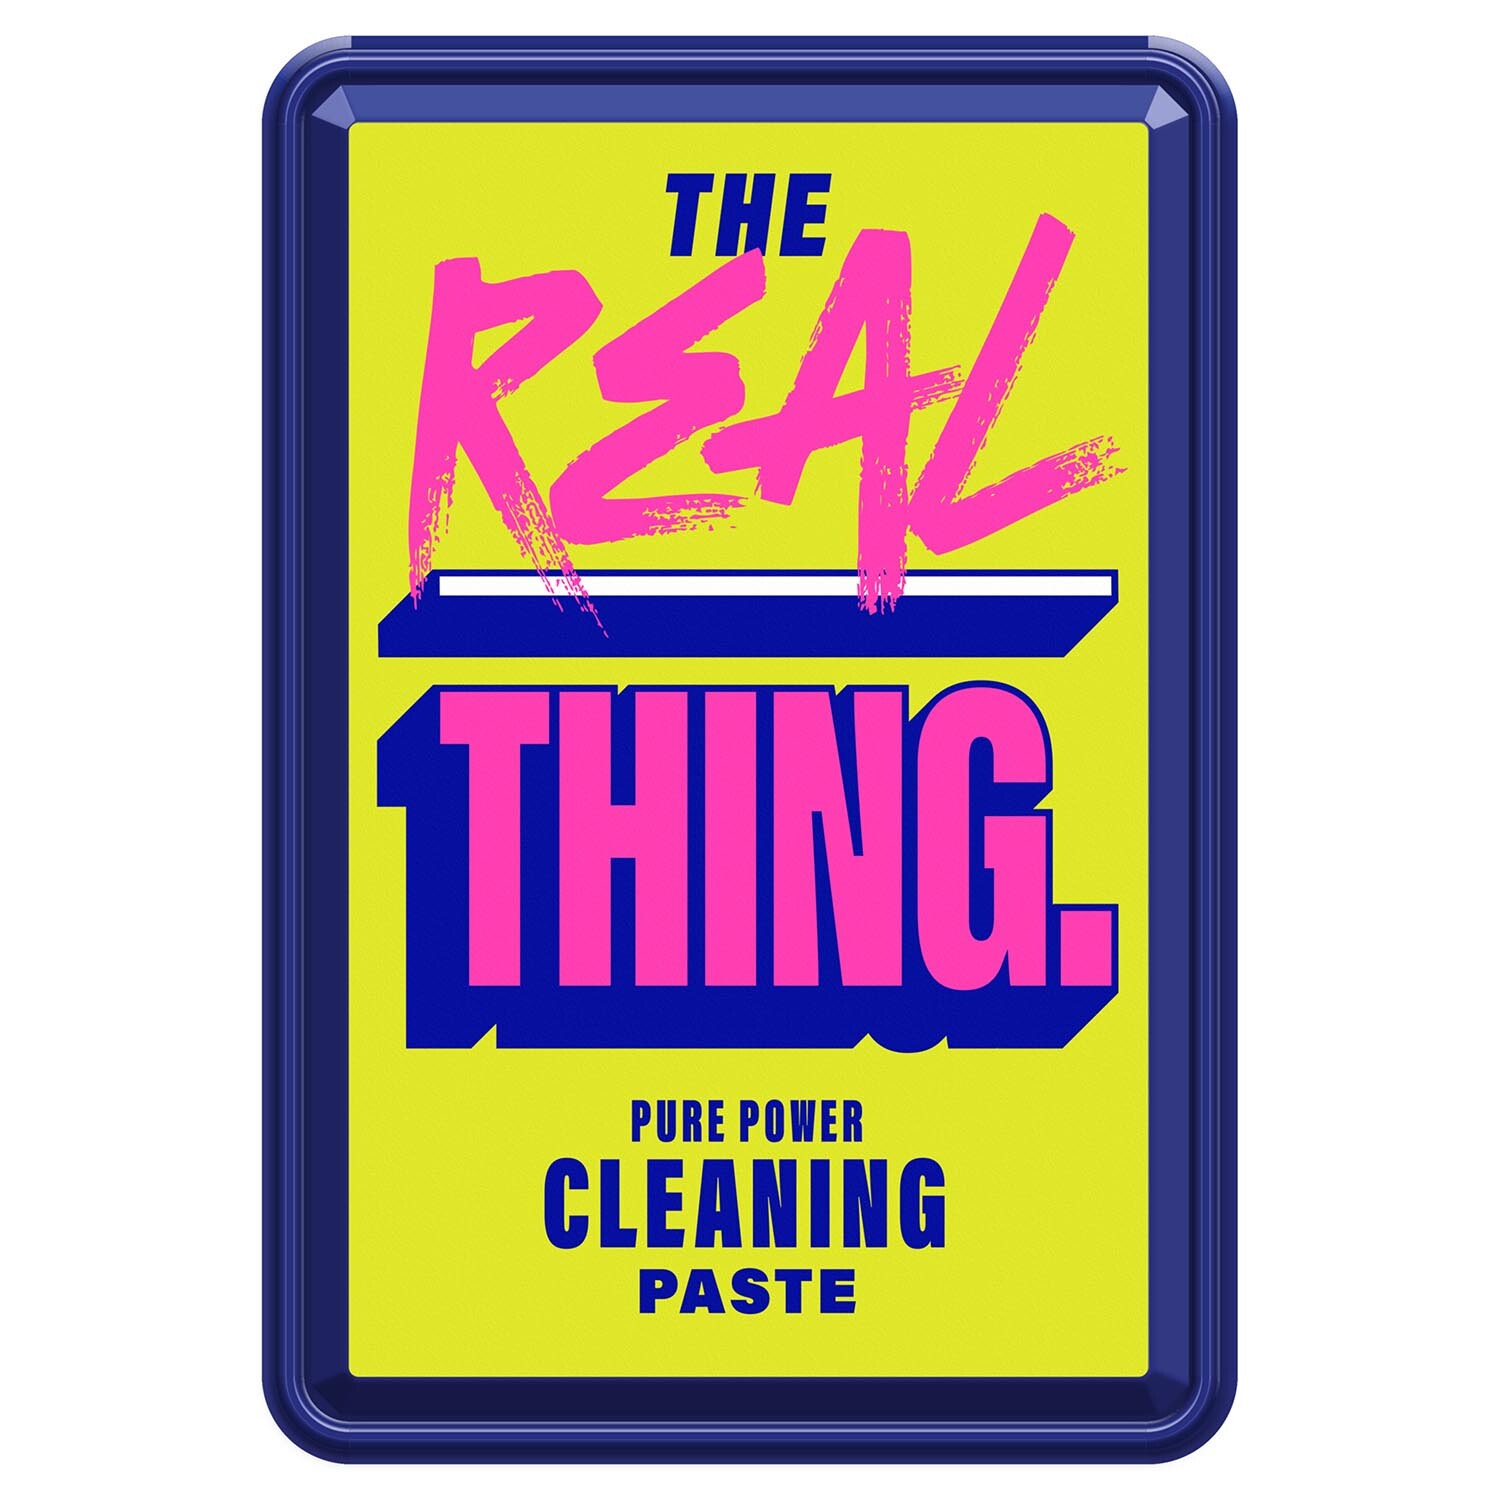 Astonish The Real Thing Cleaning Paste Image